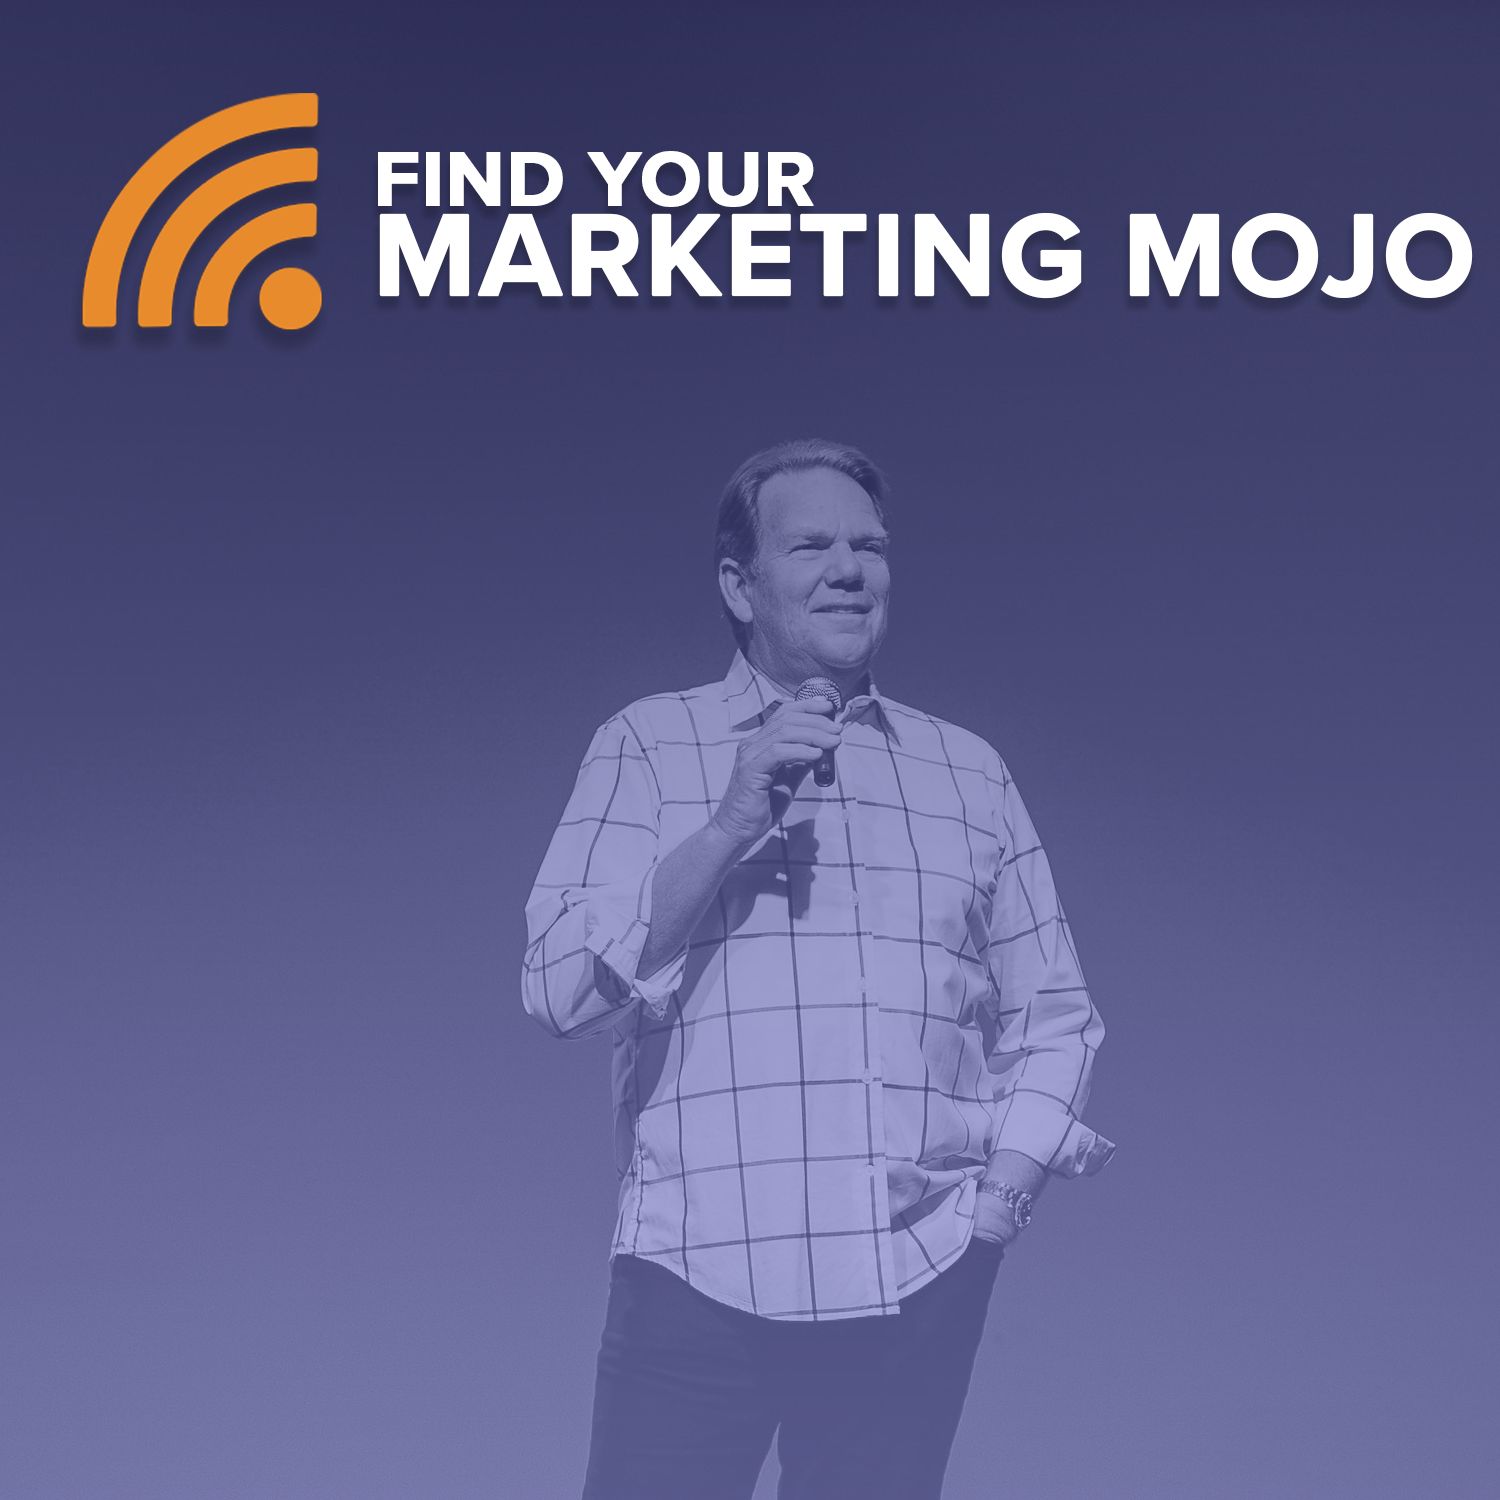 Find Your Marketing Mojo